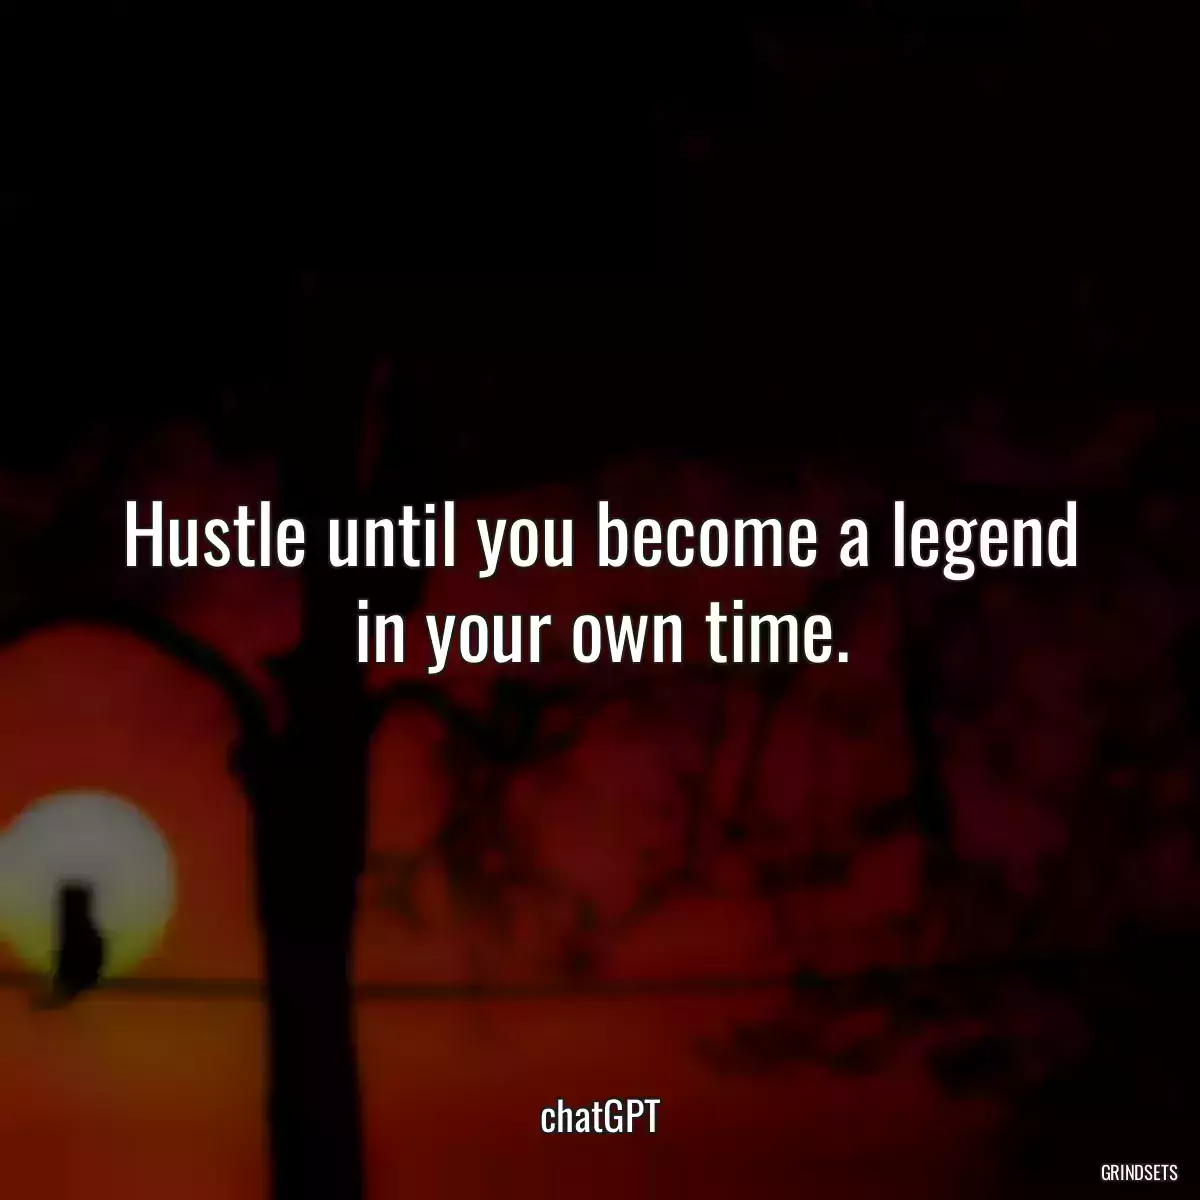 Hustle until you become a legend in your own time.